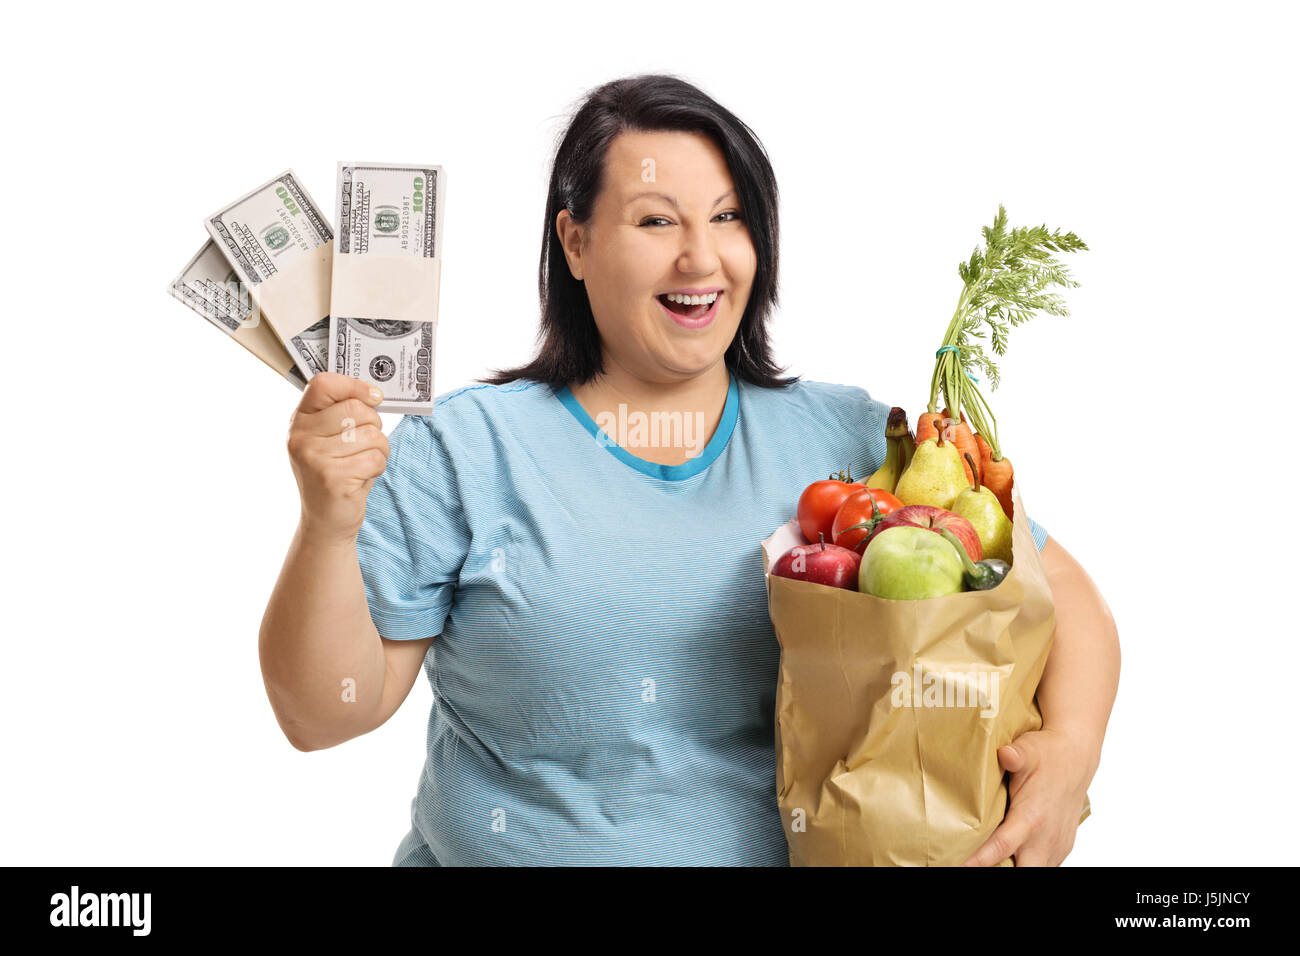 Joyful overweight woman with bundles of money and a bag filled with groceries isolated on white background Stock Photo